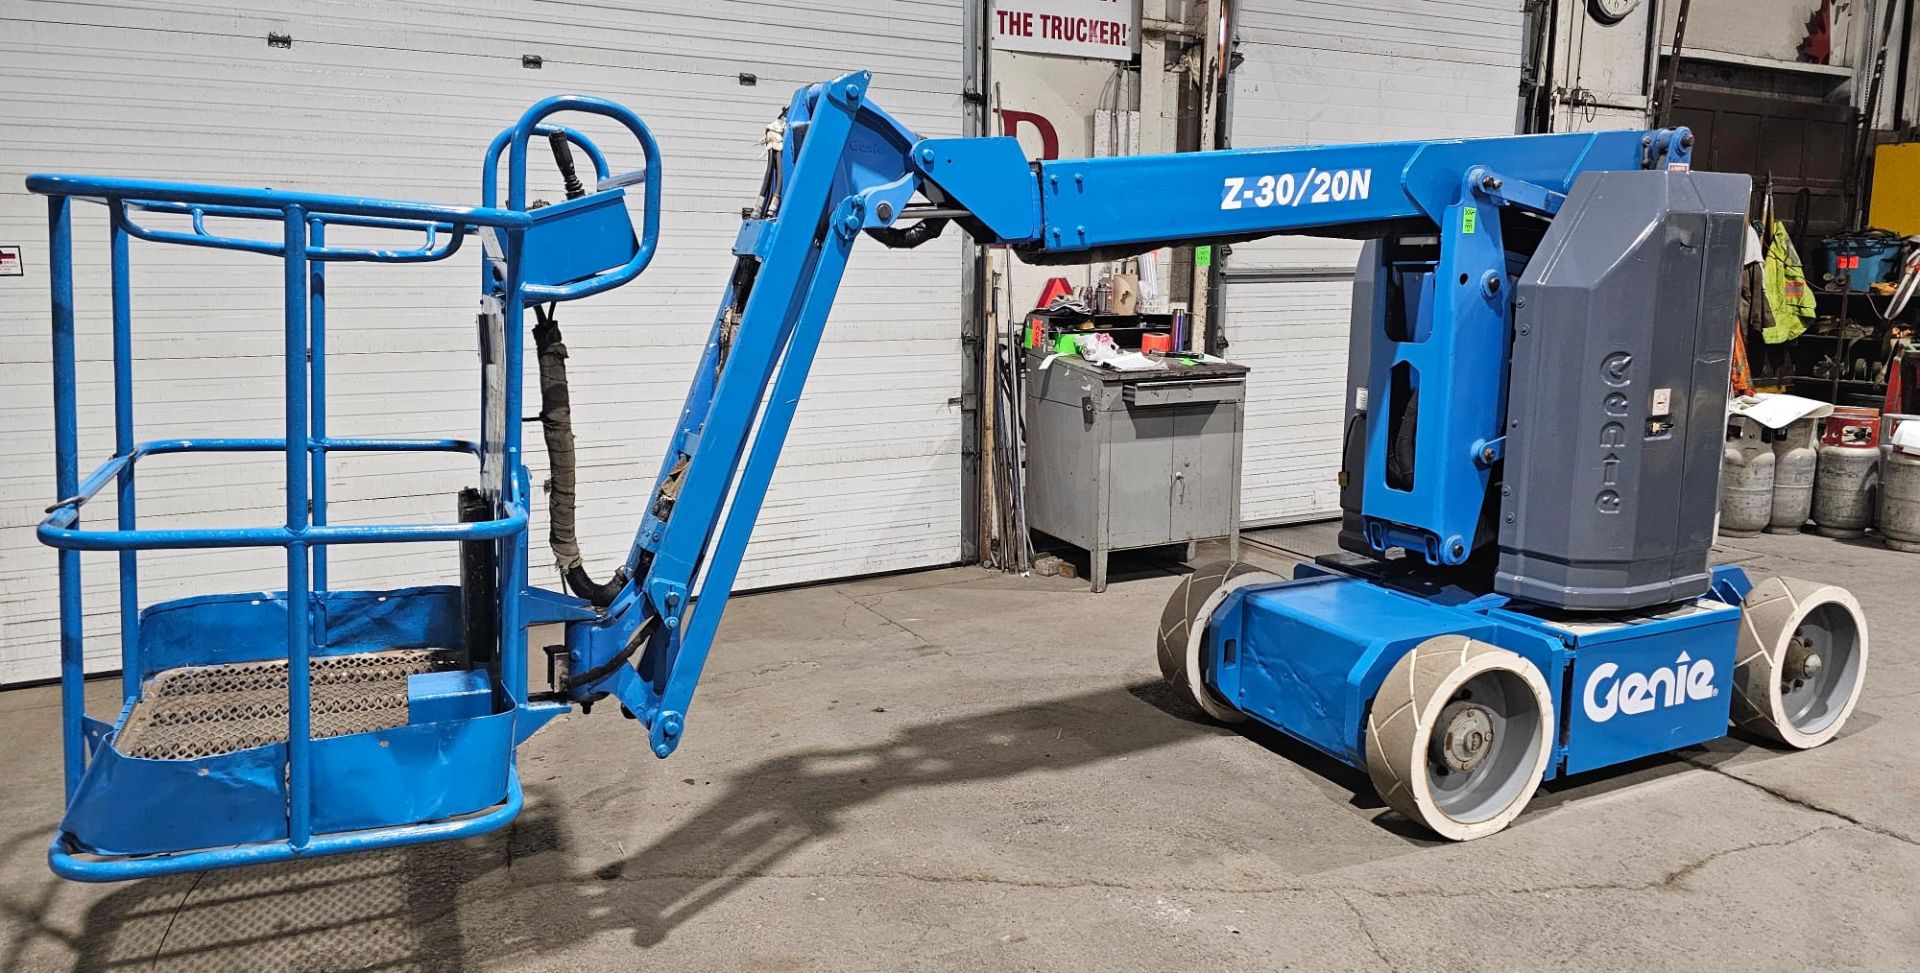 Genie model Z-30/20N Zoom Boom Electric Motorized Man Lift 30' Height & 21' Reach - with 24V Battery - Image 8 of 9